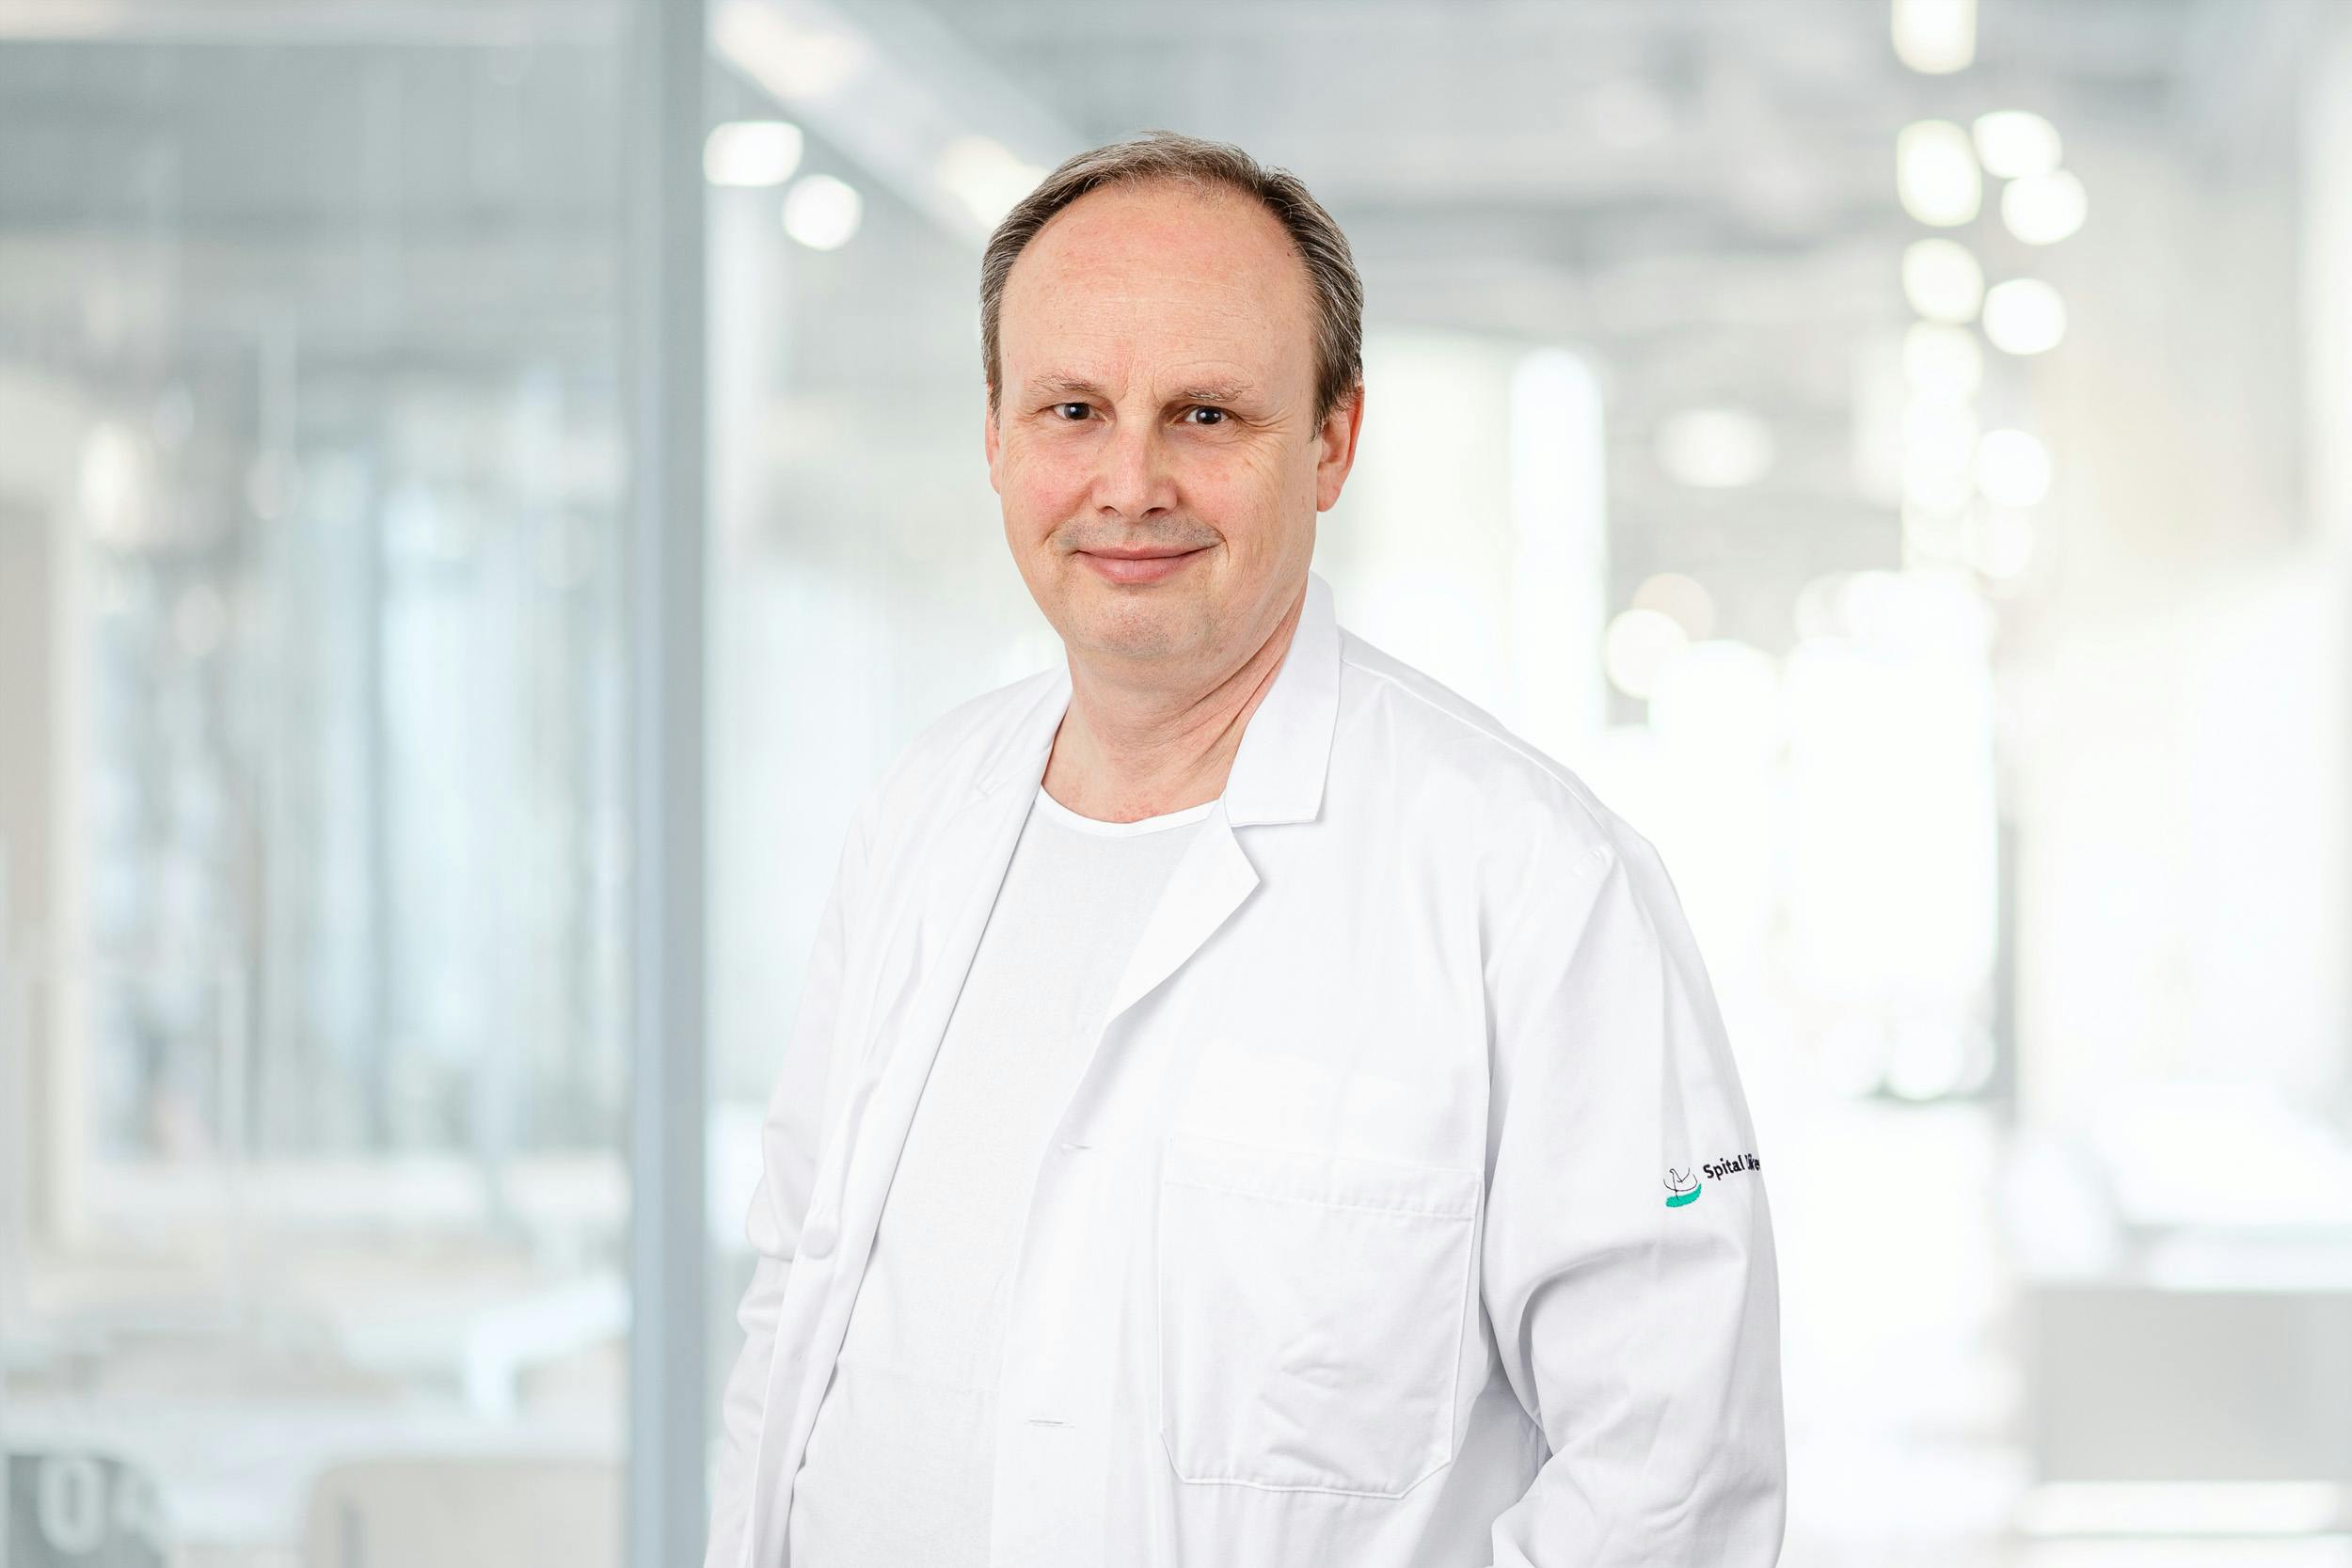 Dr Stephan Müller in a white coat against a blurred background.